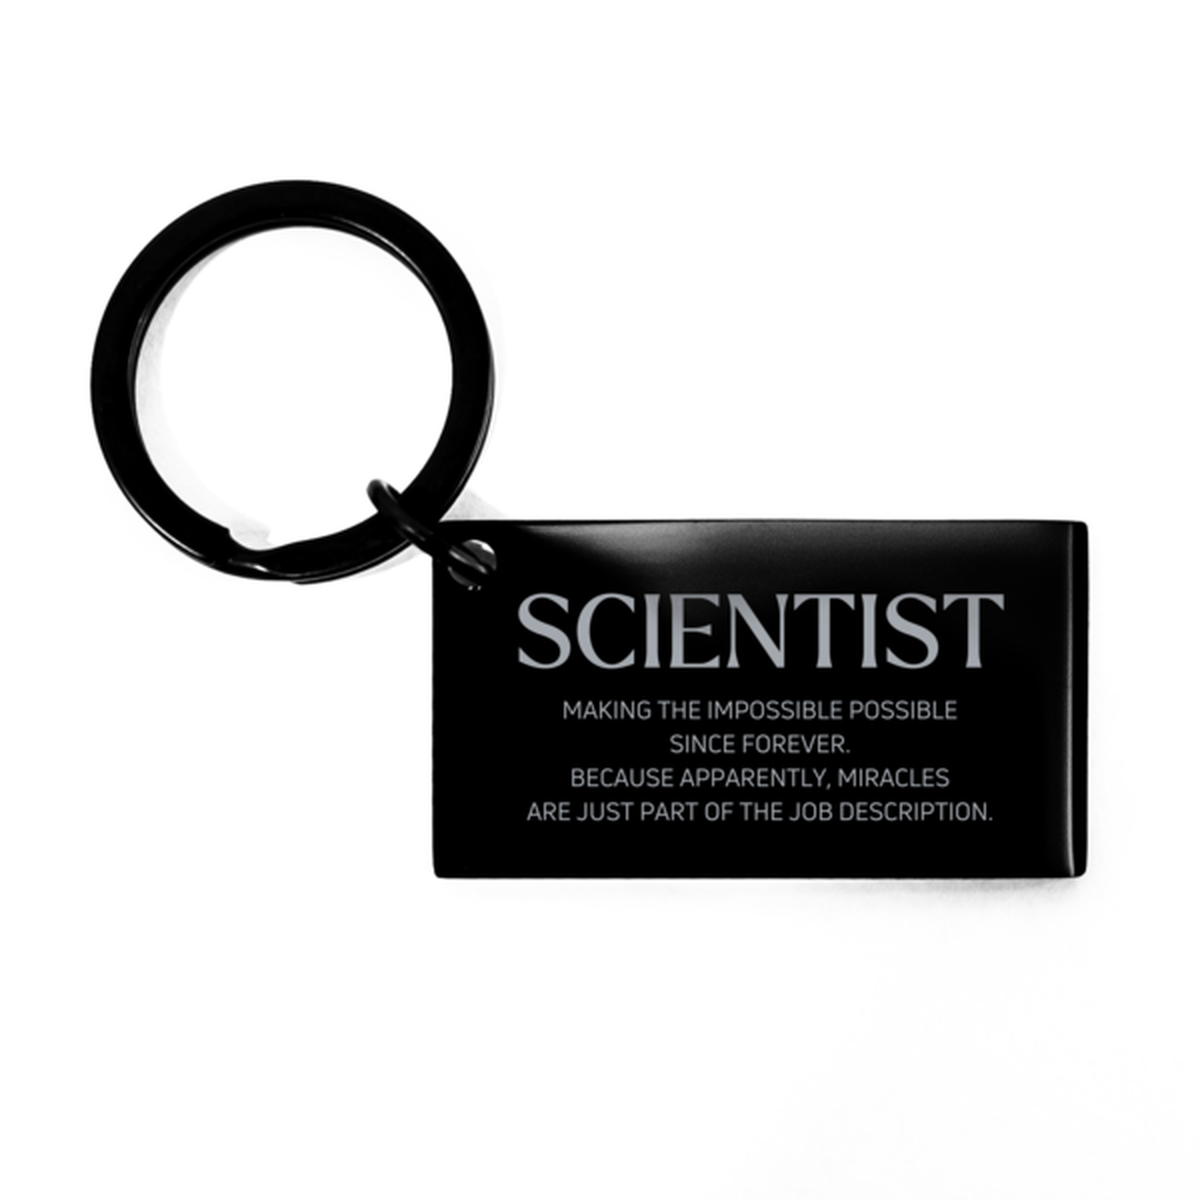 Funny Scientist Gifts, Miracles are just part of the job description, Inspirational Birthday Keychain For Scientist, Men, Women, Coworkers, Friends, Boss